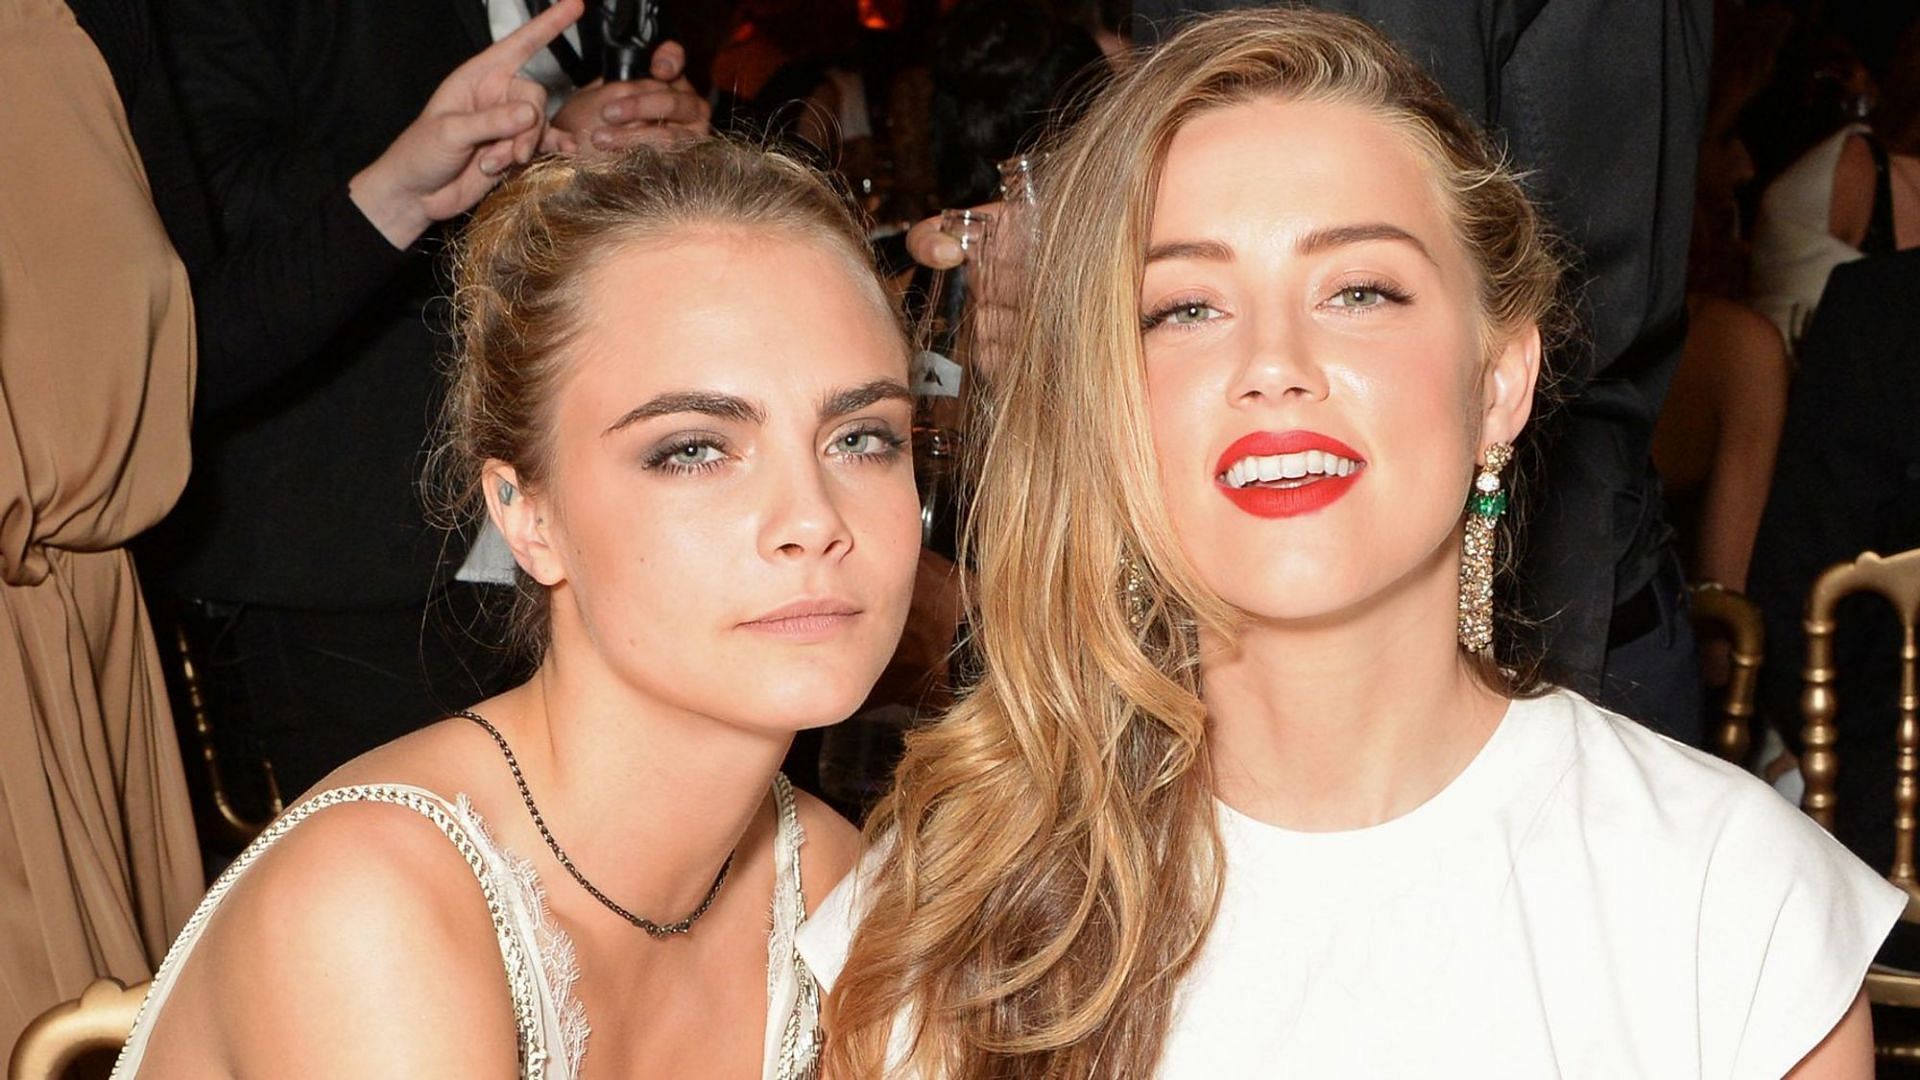 Cara Delevingne and Amber Heard&#039;s relationship explored as elevator photos go viral (Image via Getty Images)